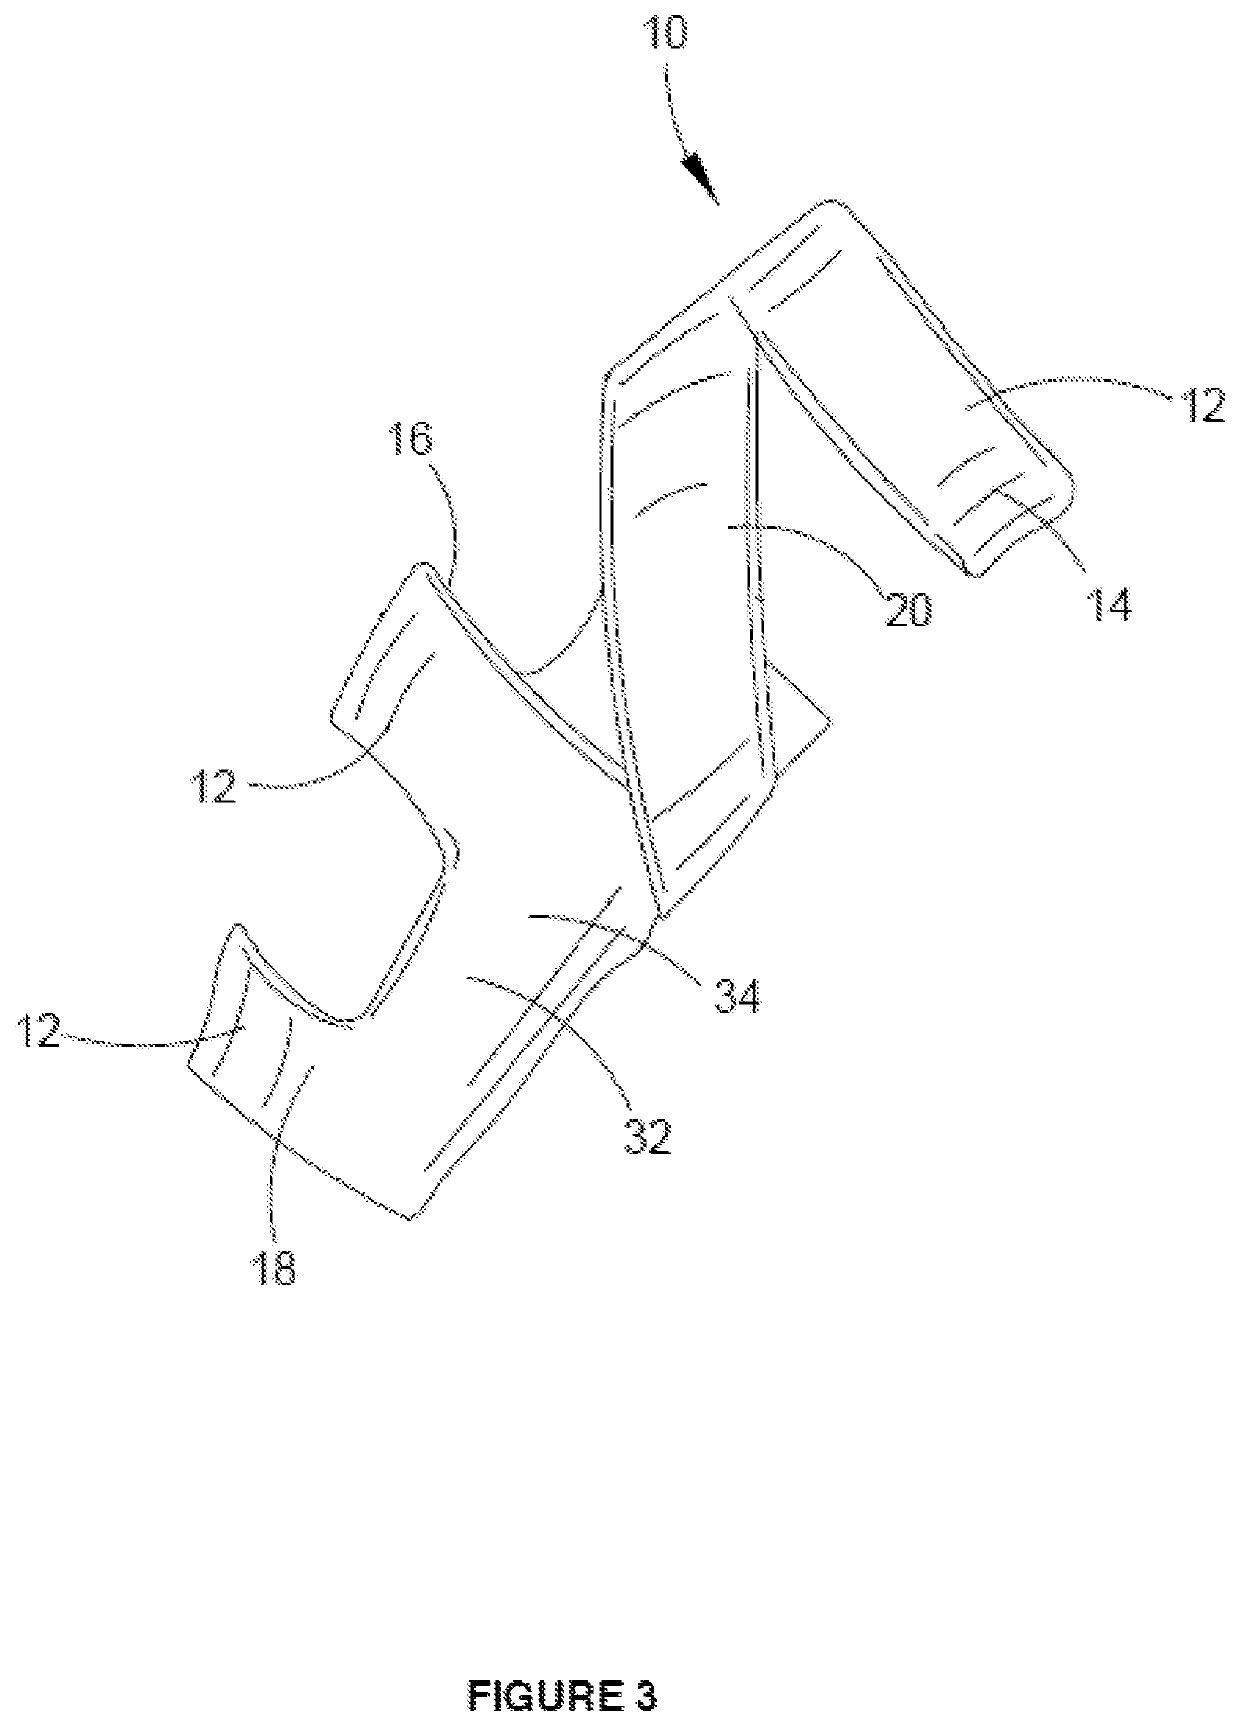 Device for the treatment of medial tibial stress syndrome and other conditions of the lower leg